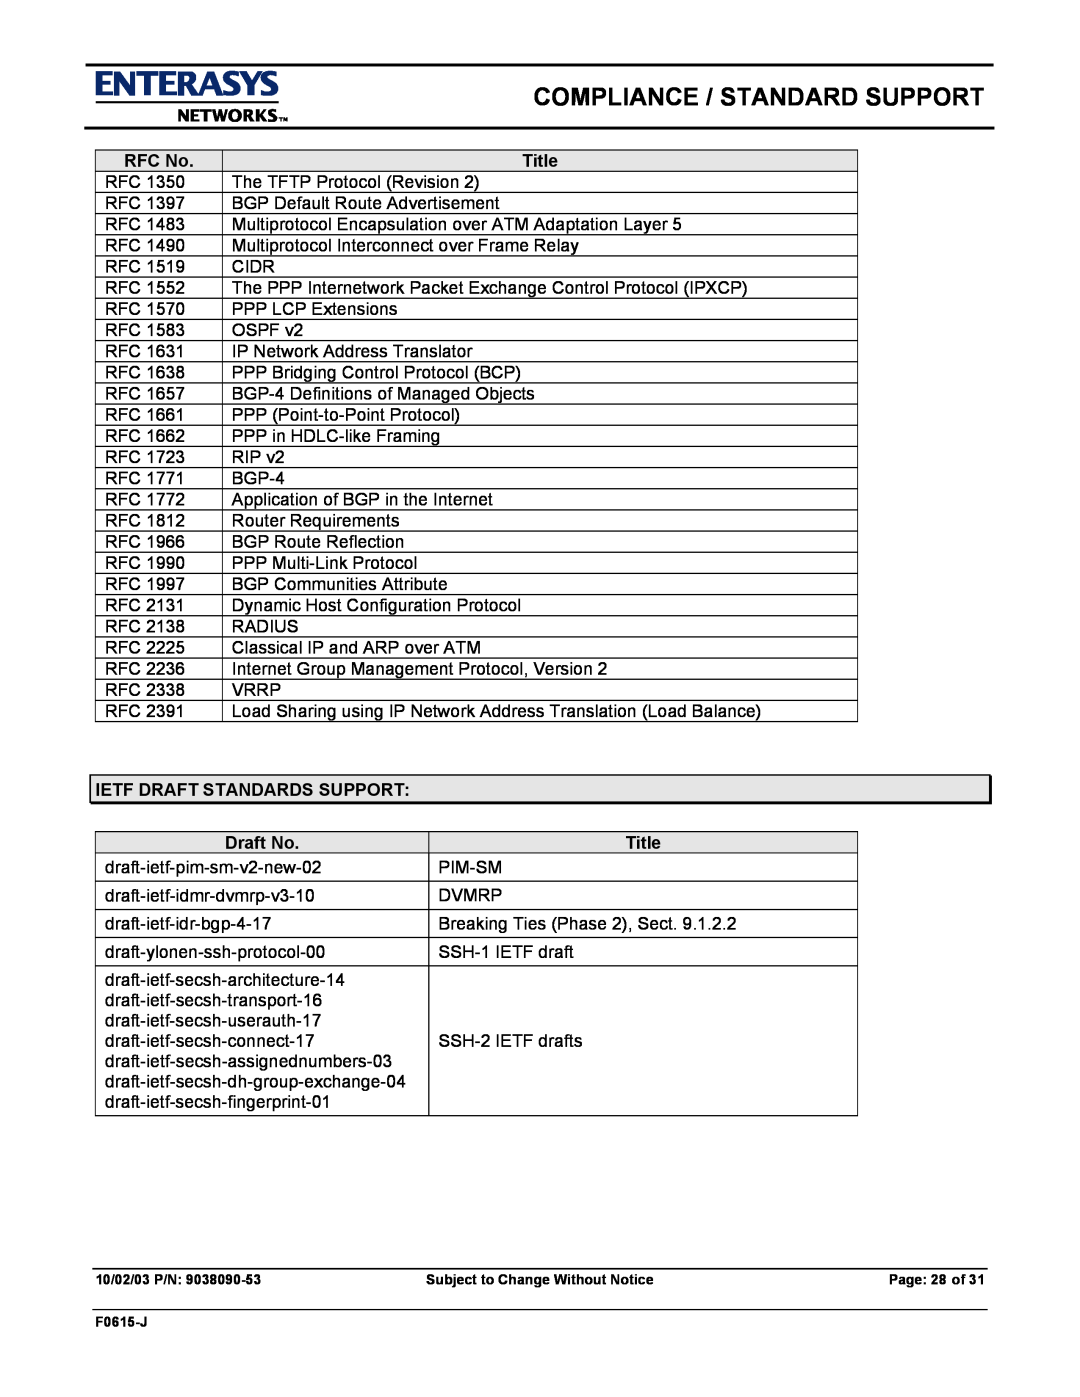 Enterasys Networks E9.1.7.0 manual Compliance / Standard Support, Page 28 of 